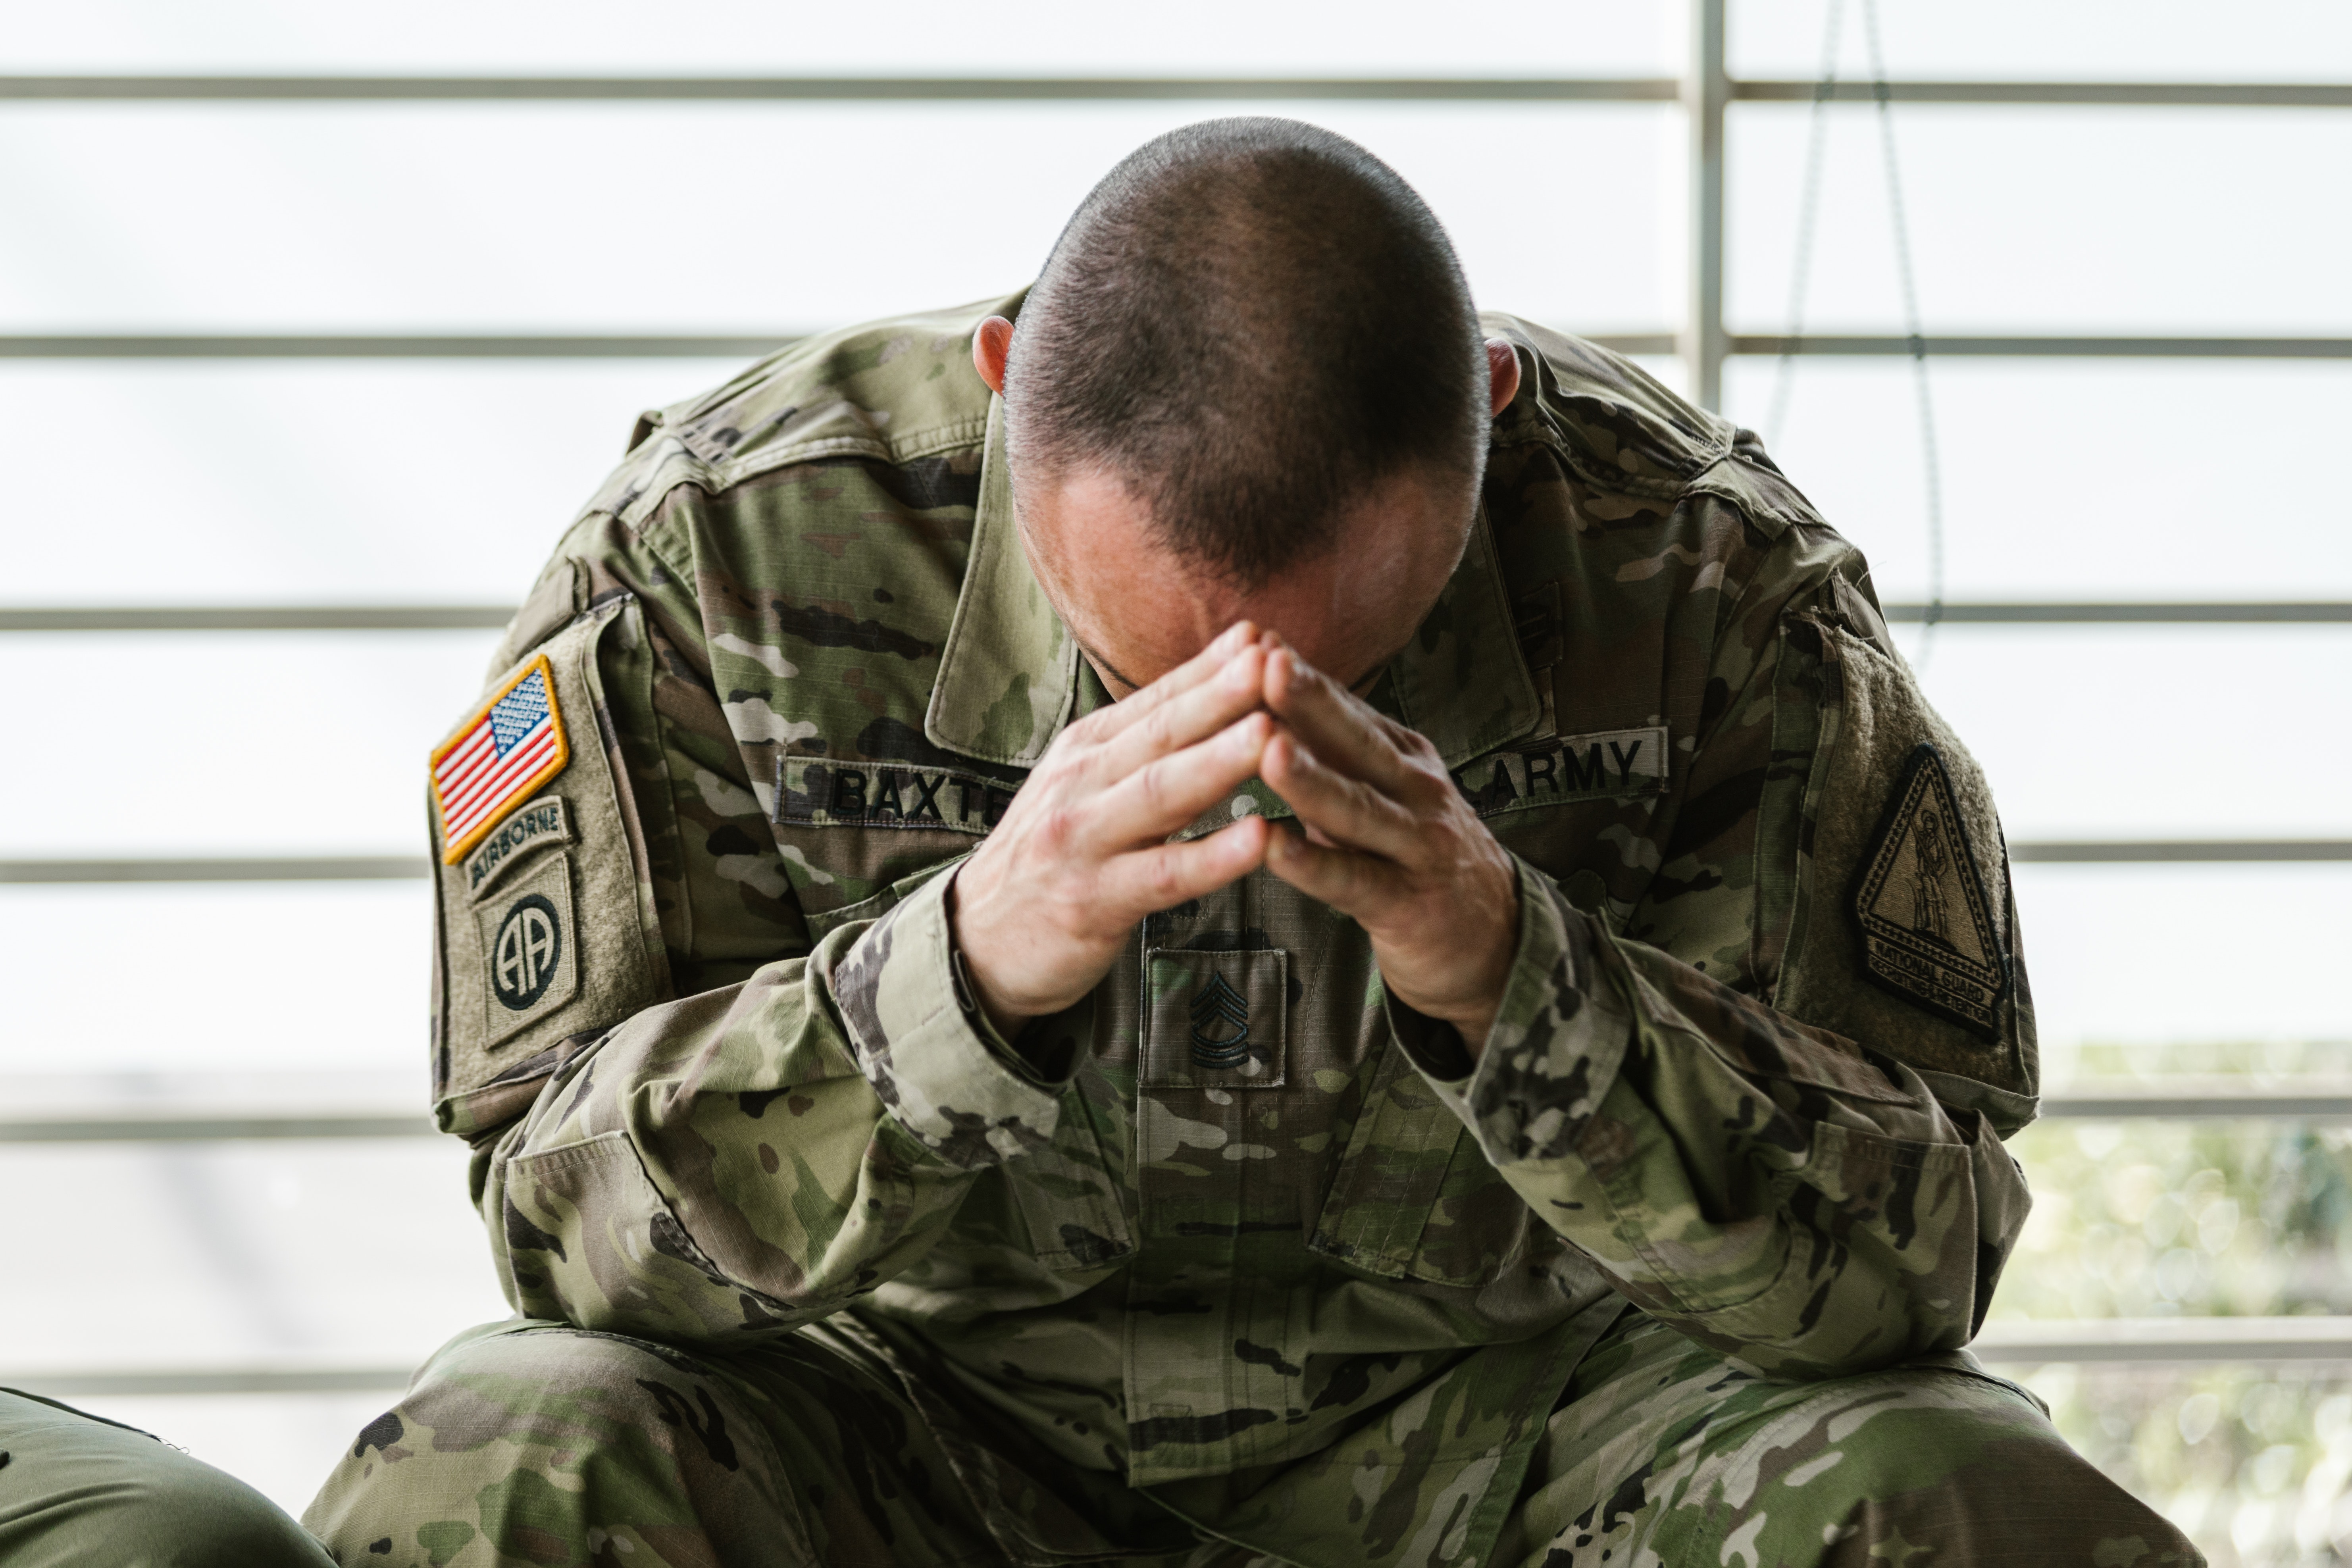 A Caucasian man wearing a military camo uniform sitting with both hands to his forehead while looking down